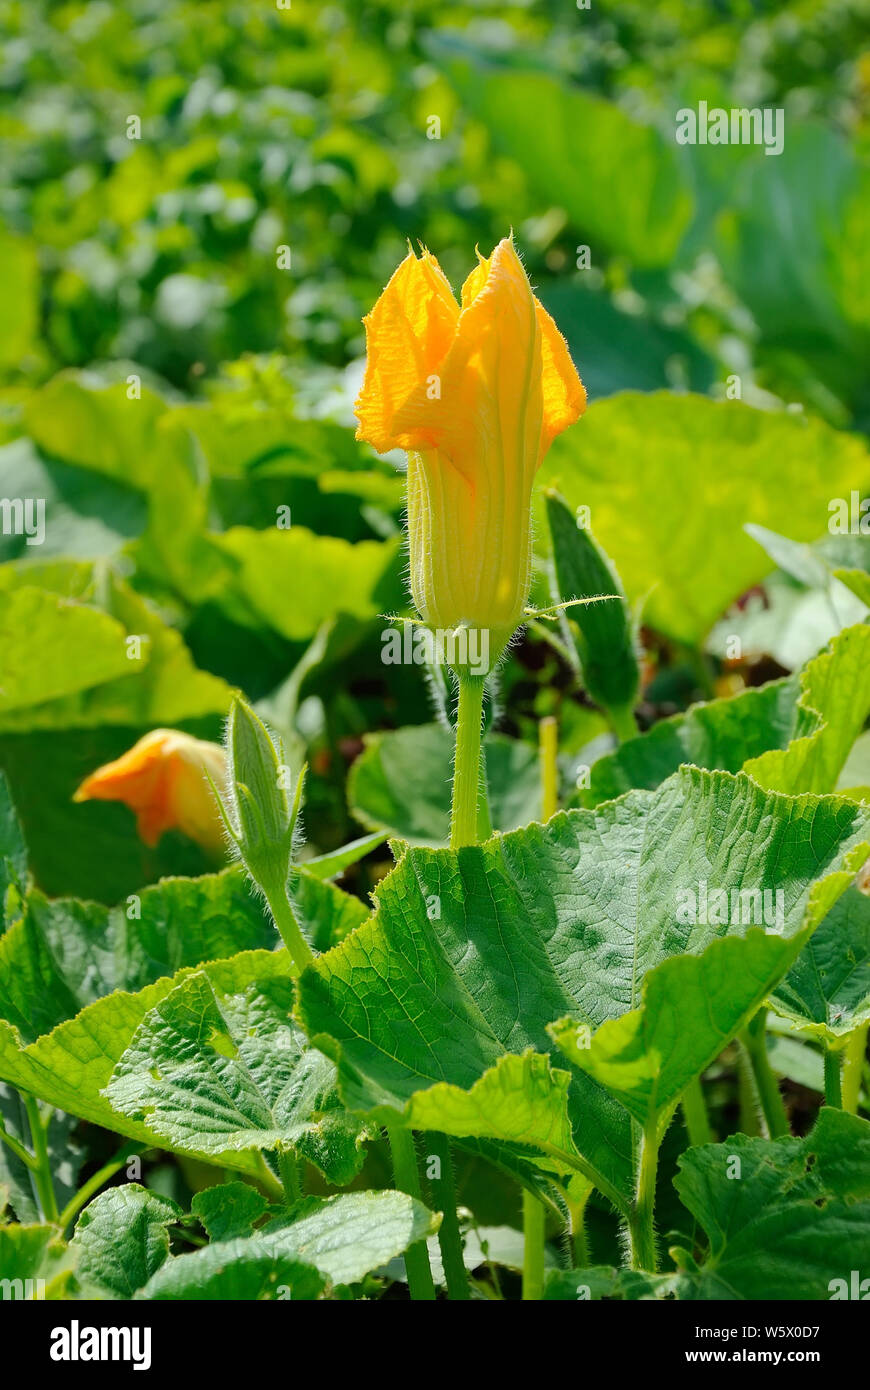 Flower of the zucchini plant. Stock Photo